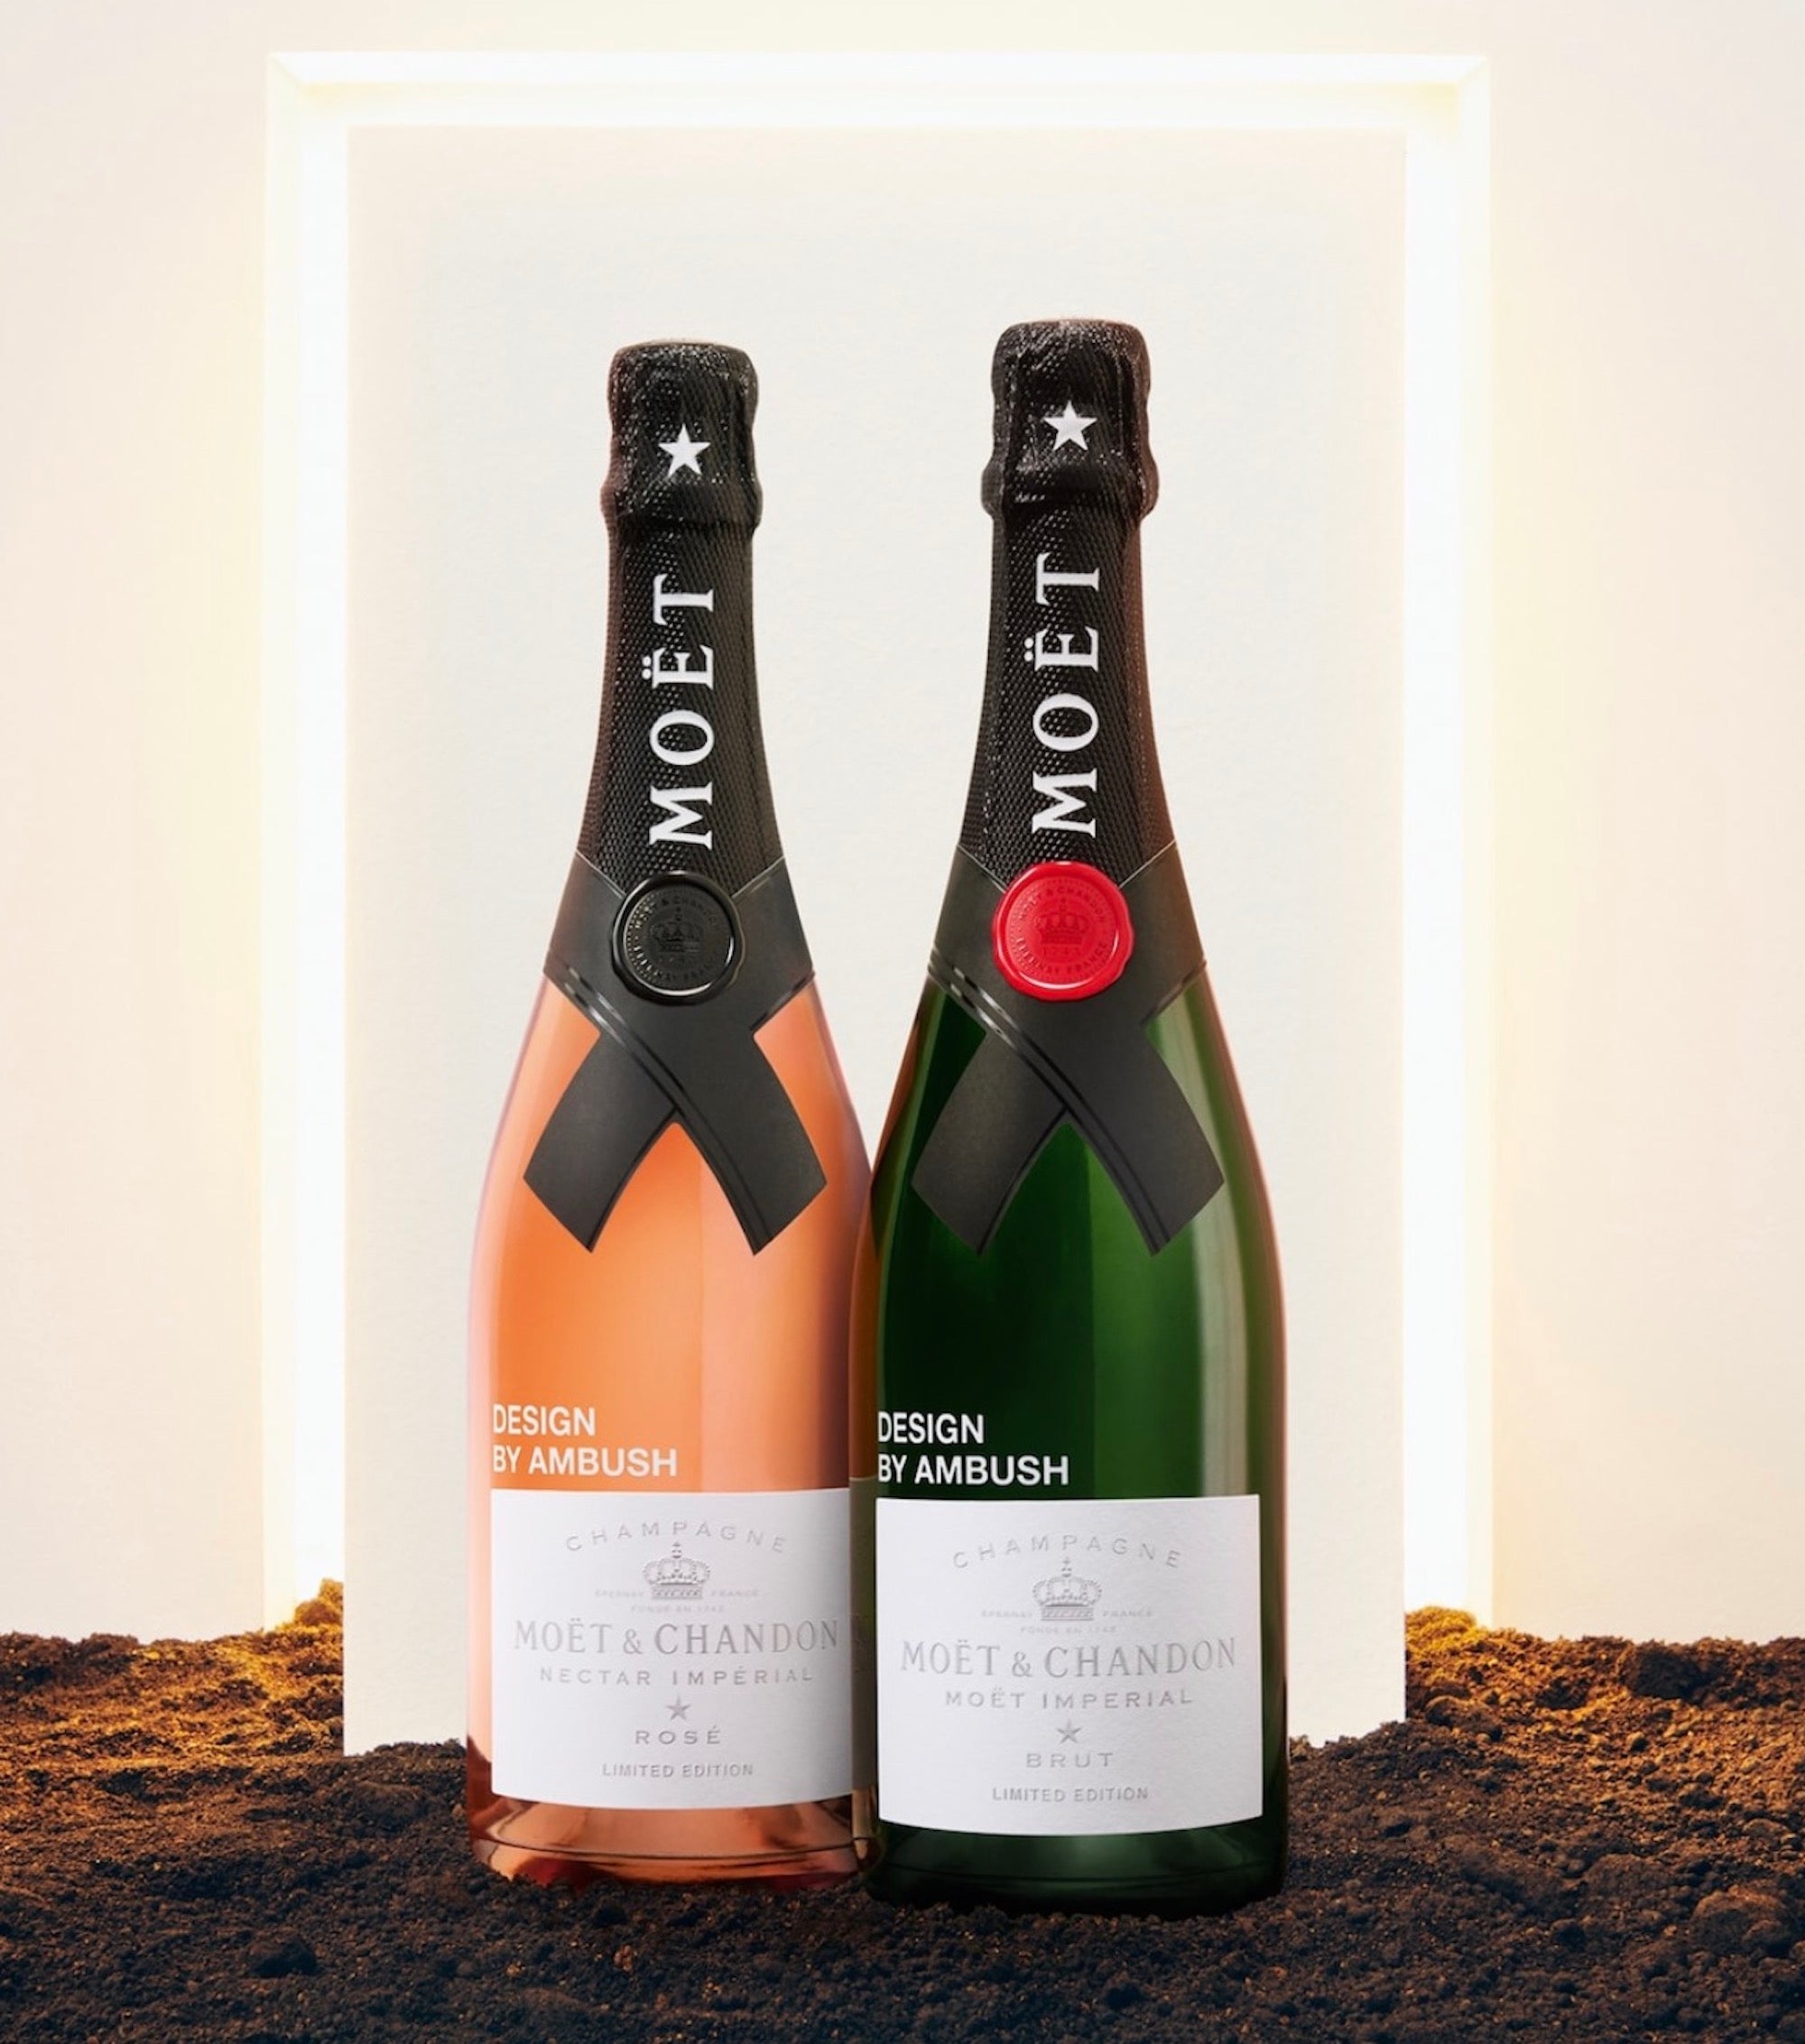 Where to buy Moet & Chandon Nectar Imperial Rose Limited Edition Design by  Ambush - Yoon Ahn, Champagne, France